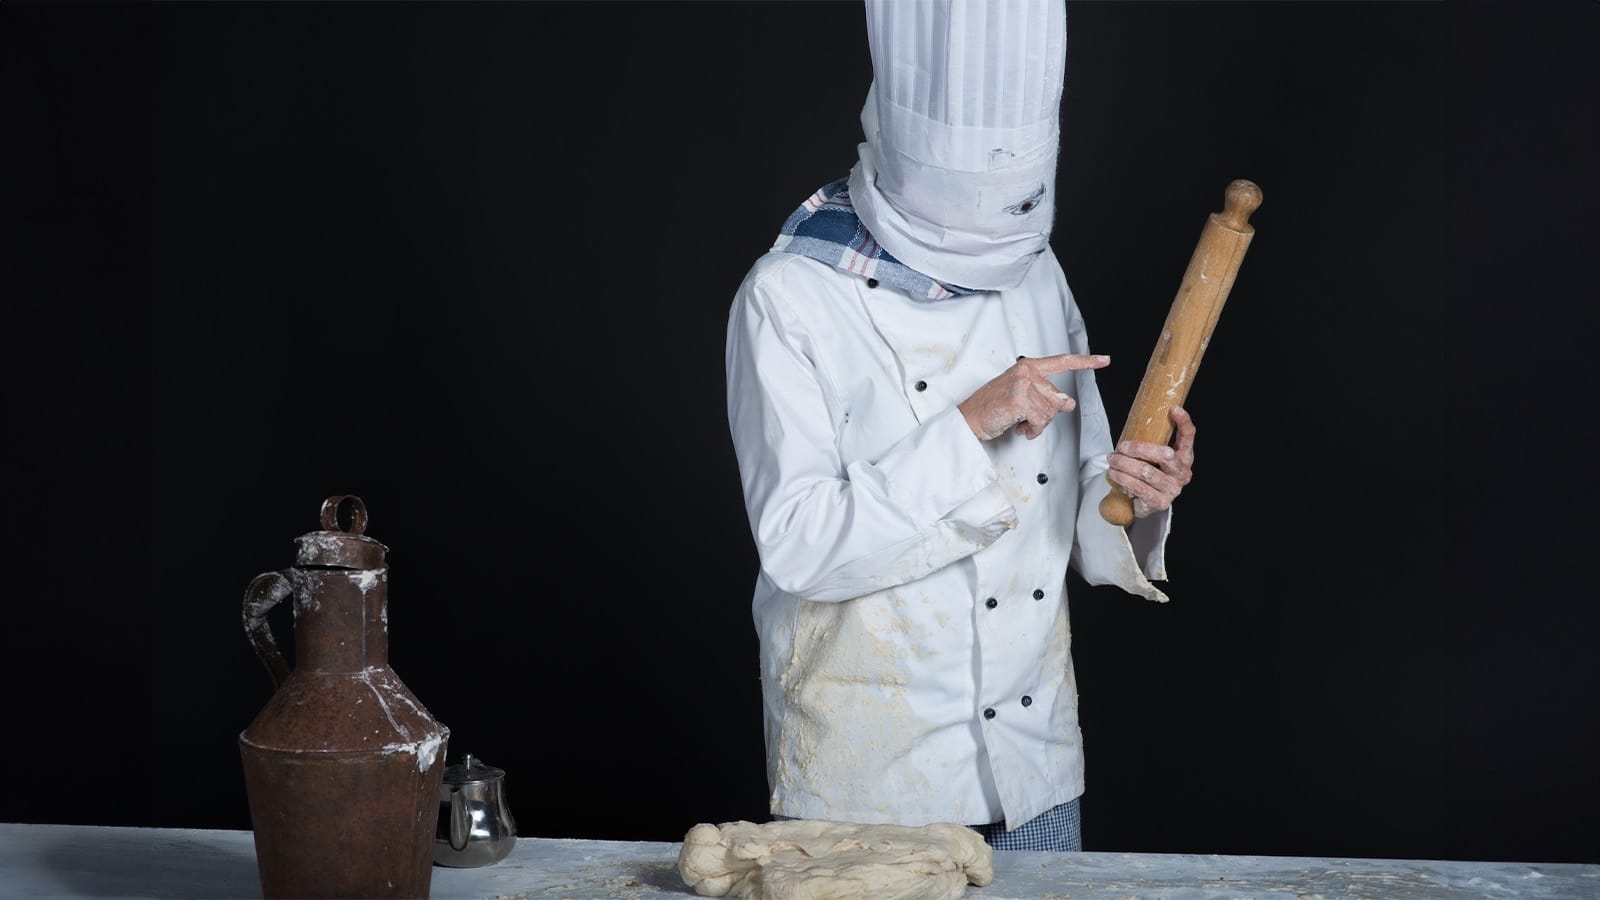 A person dressed as a chef points accusingly at a rolling pin